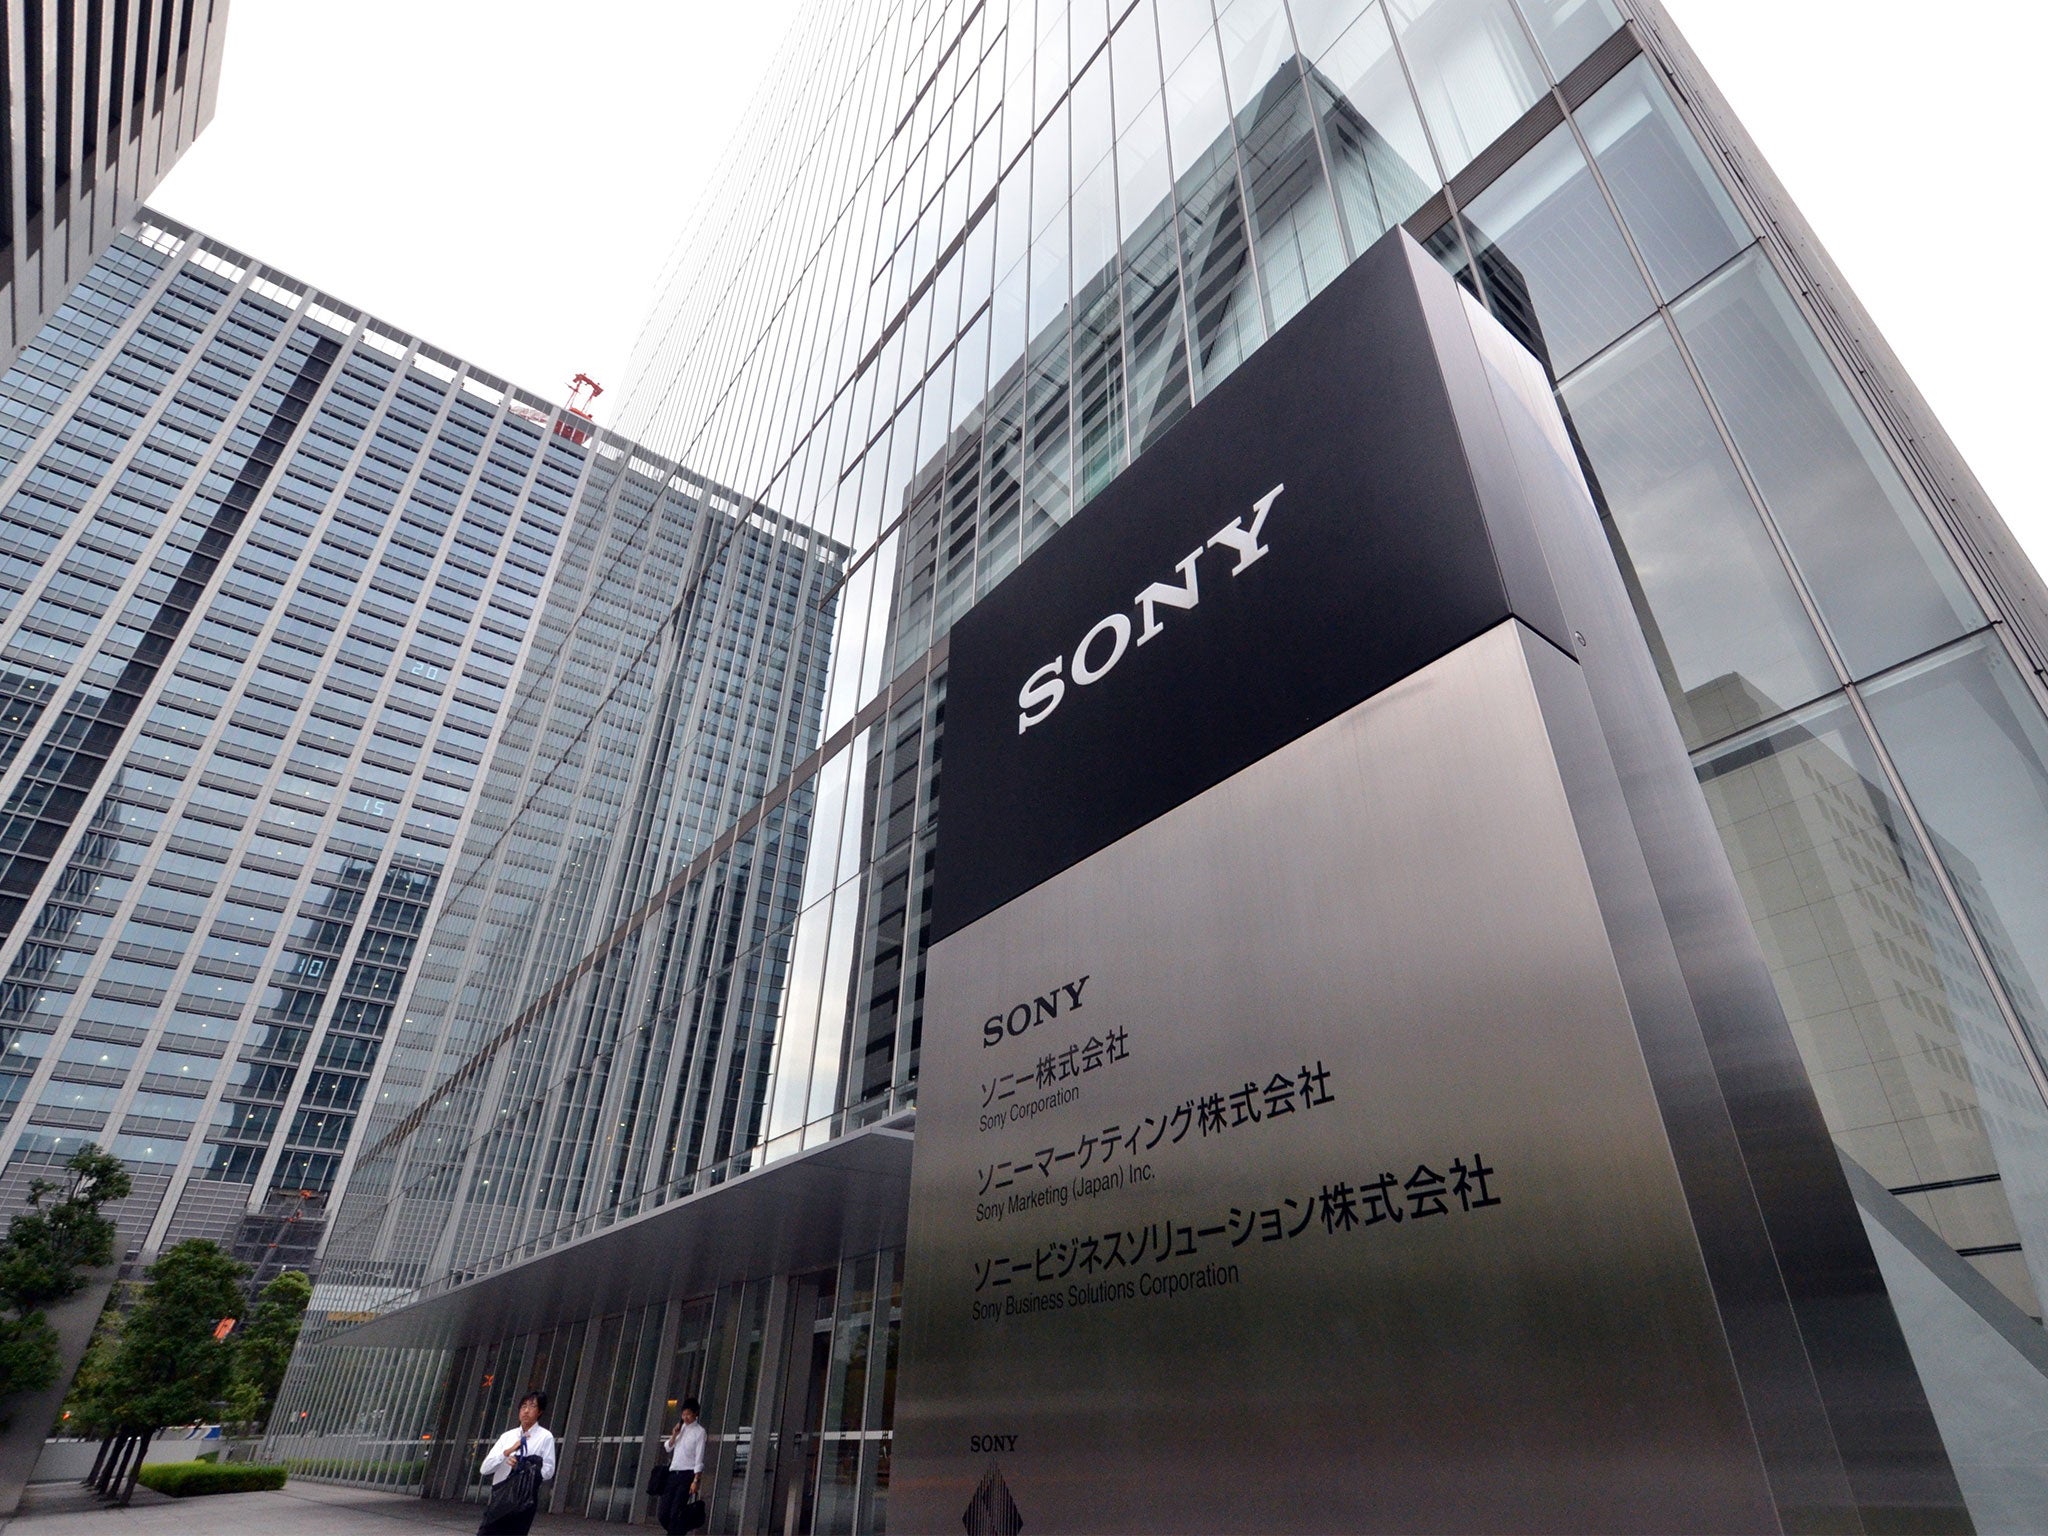 Sony shares plunged 12% at the open in Tokyo after the electronics giant warned it would lose $2.14 billion this fiscal year, more than four times its earlier forecast